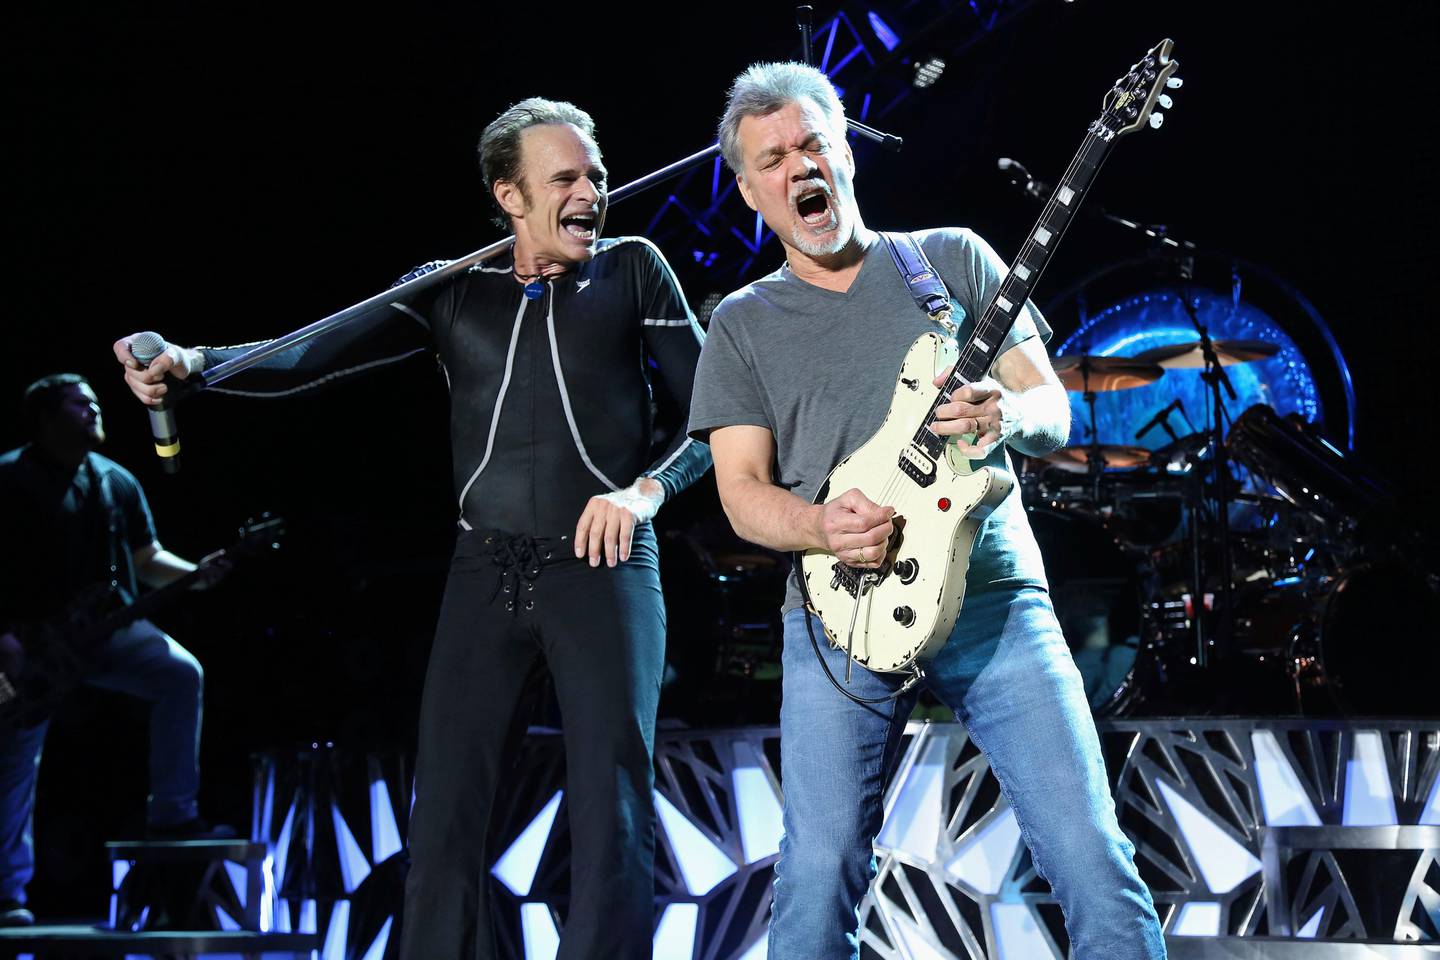 FILE - David Lee Roth, left, and Eddie Van Halen of Van Halen perform in Wantagh, N.Y. on Aug. 13, 2015. Van Halen, who had battled cancer, died Tuesday, Oct. 6, 2020. He was 65. (Photo by Greg Allen/Invision/AP, File)